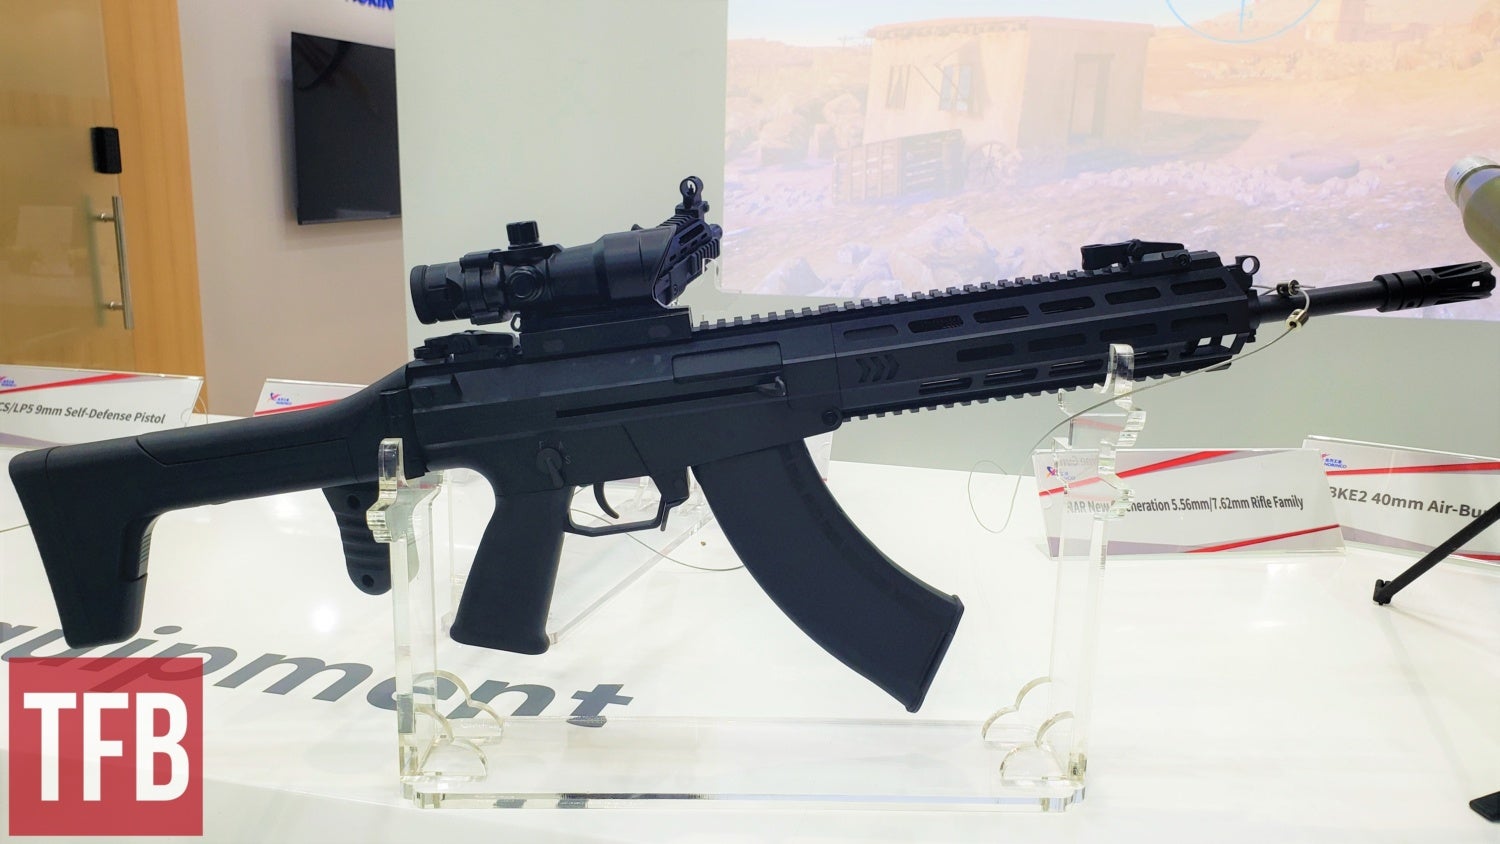 7.62x39 NAR, the newest addition to the small arms of China